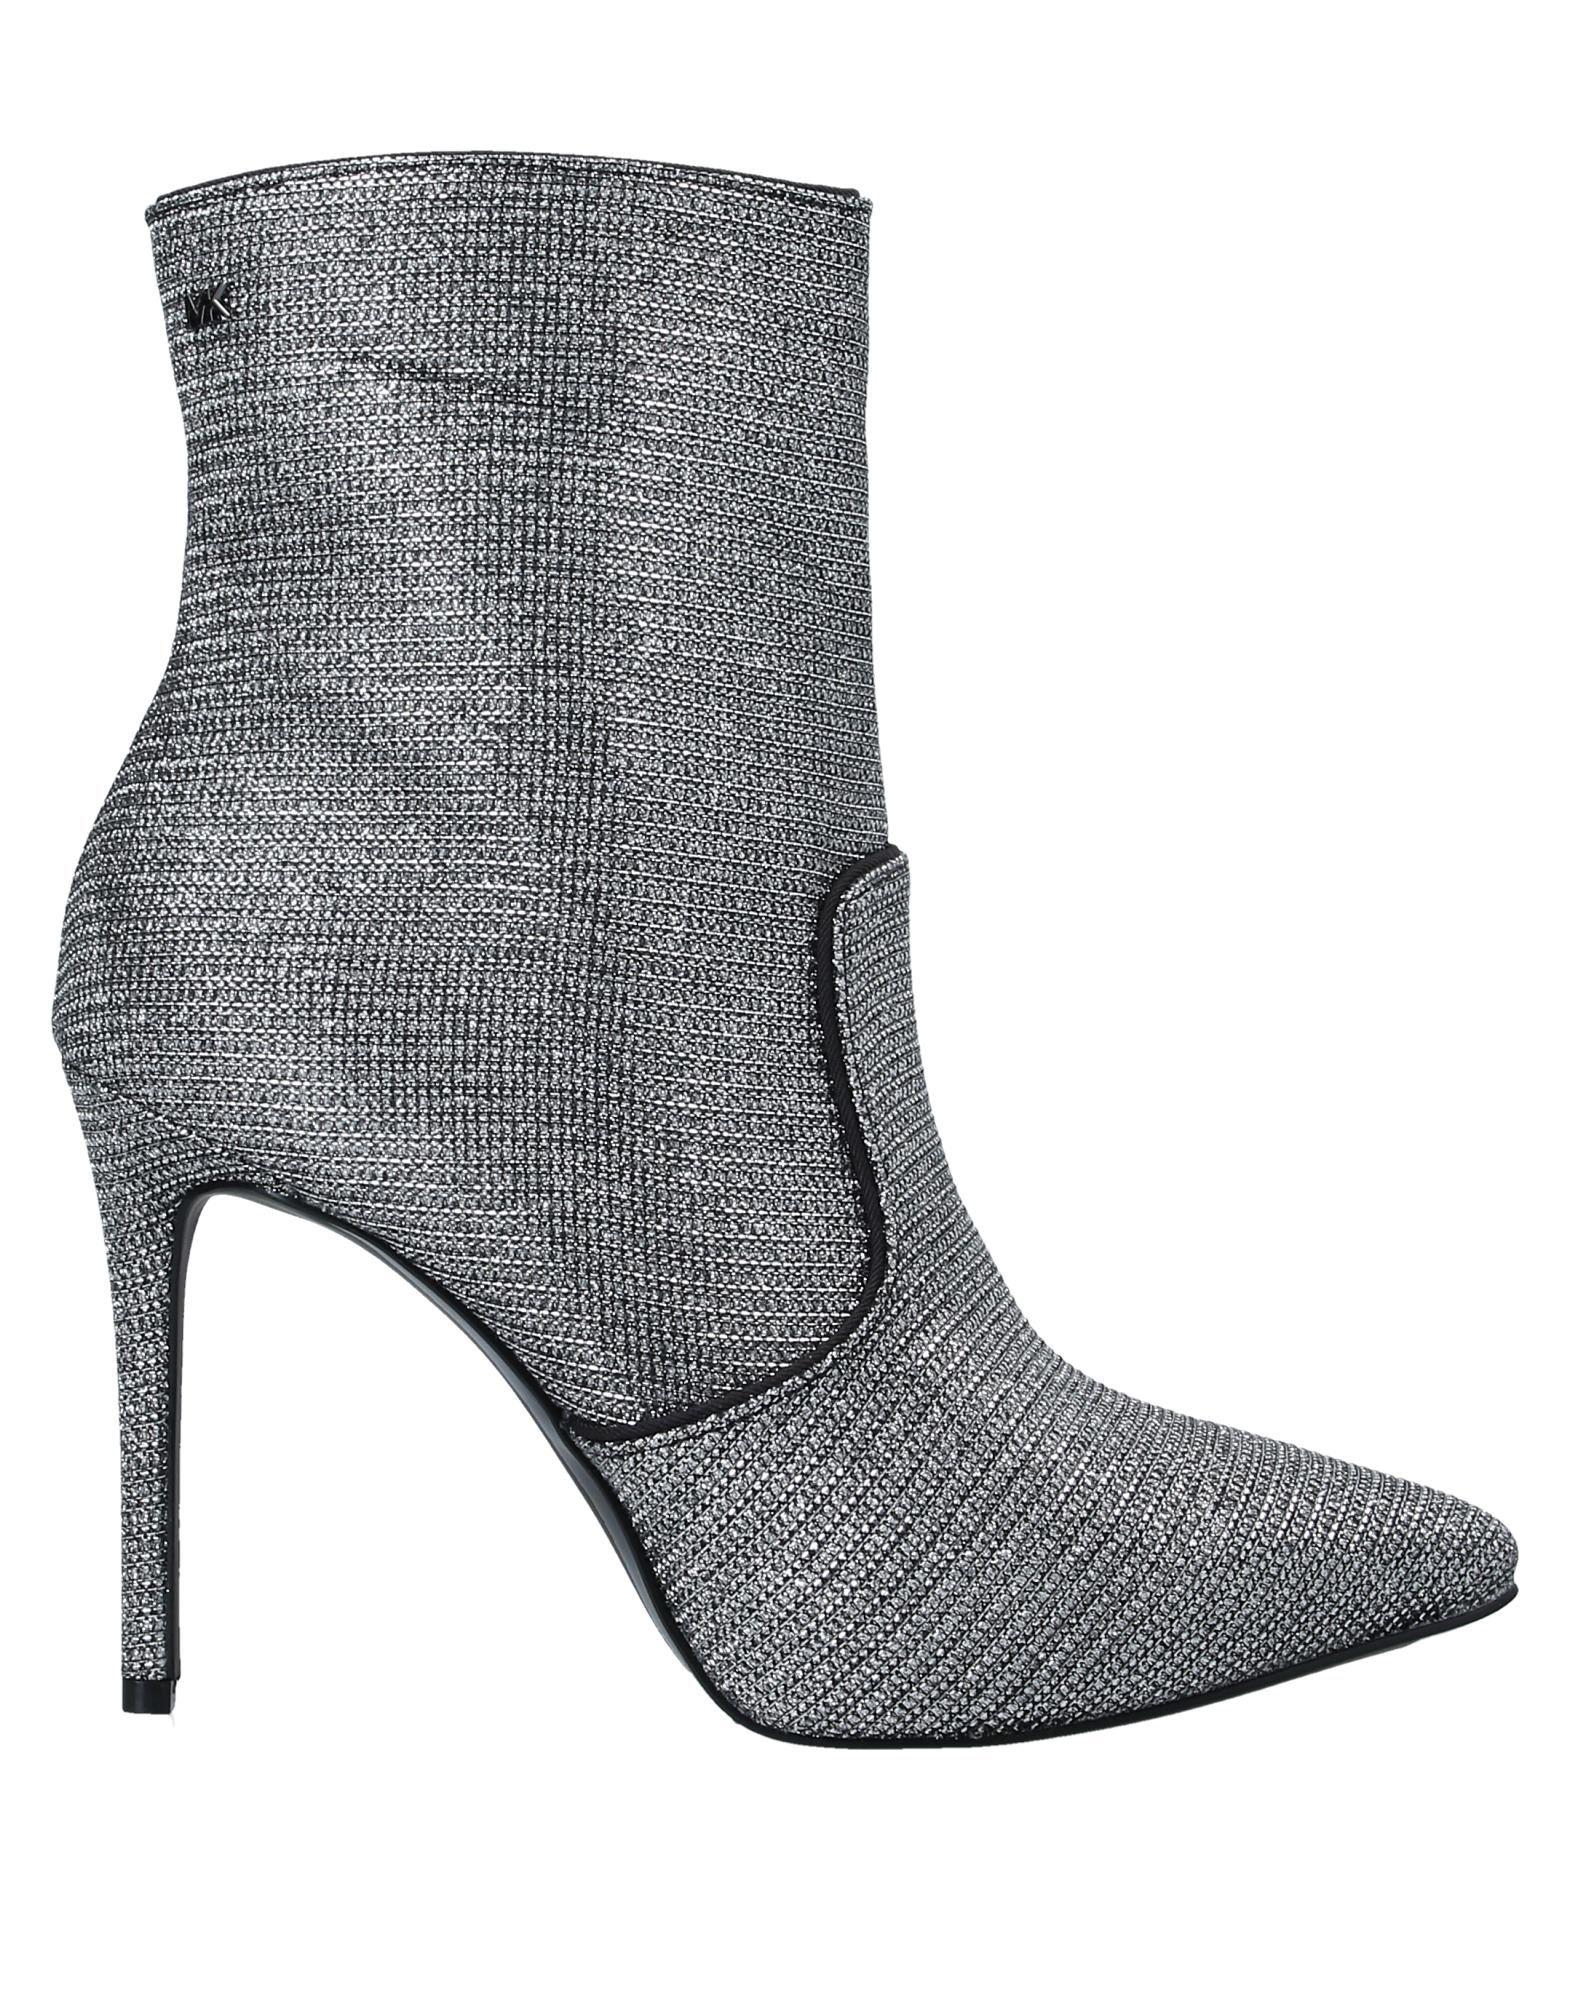 MICHAEL Michael Kors Ankle Boots in Silver (Metallic) - Lyst